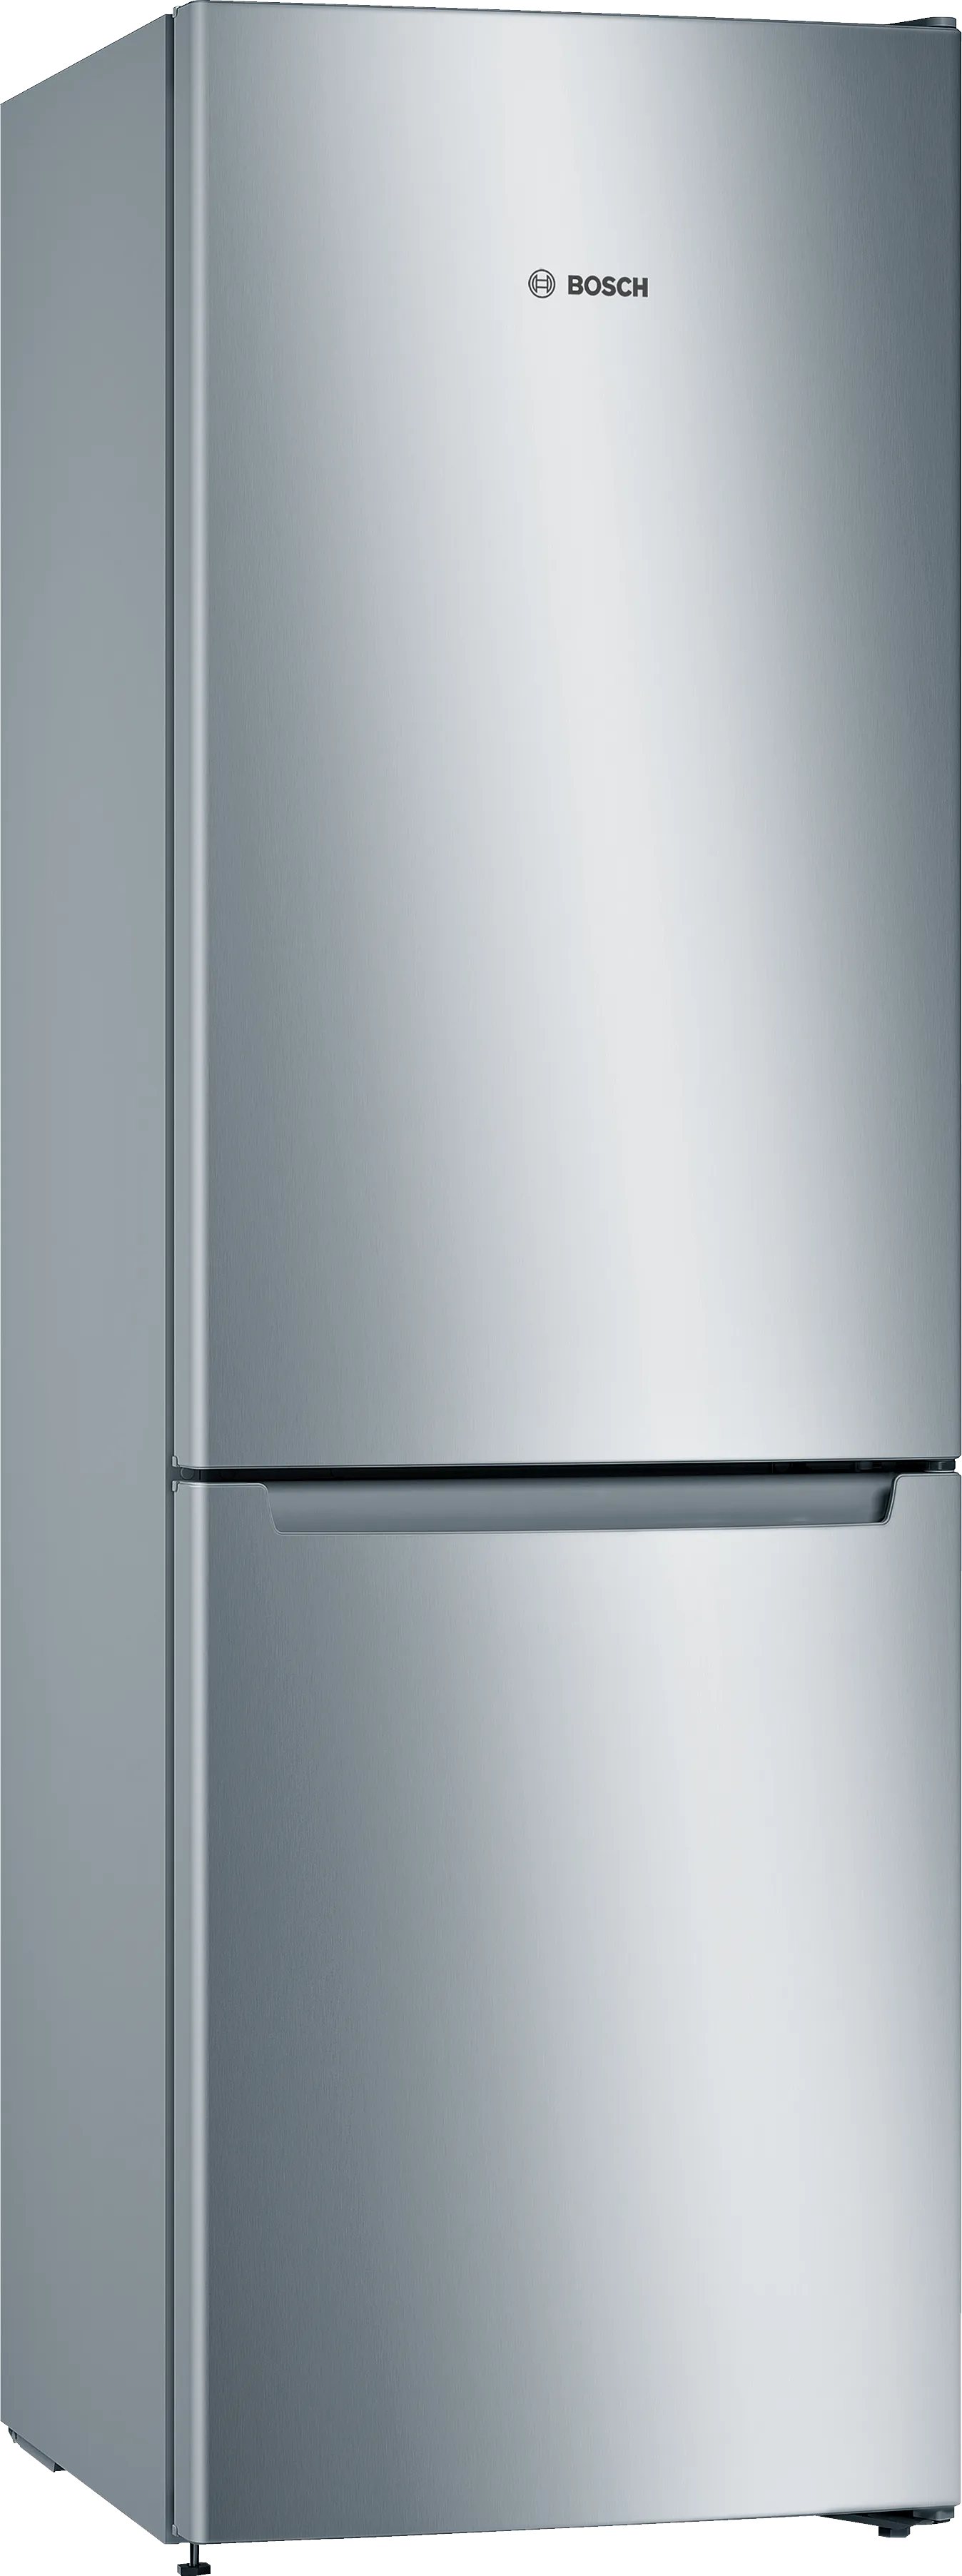 Series 2 free-standing fridge-freezer with freezer at bottom 176 x 60 cm Stainless steel look 